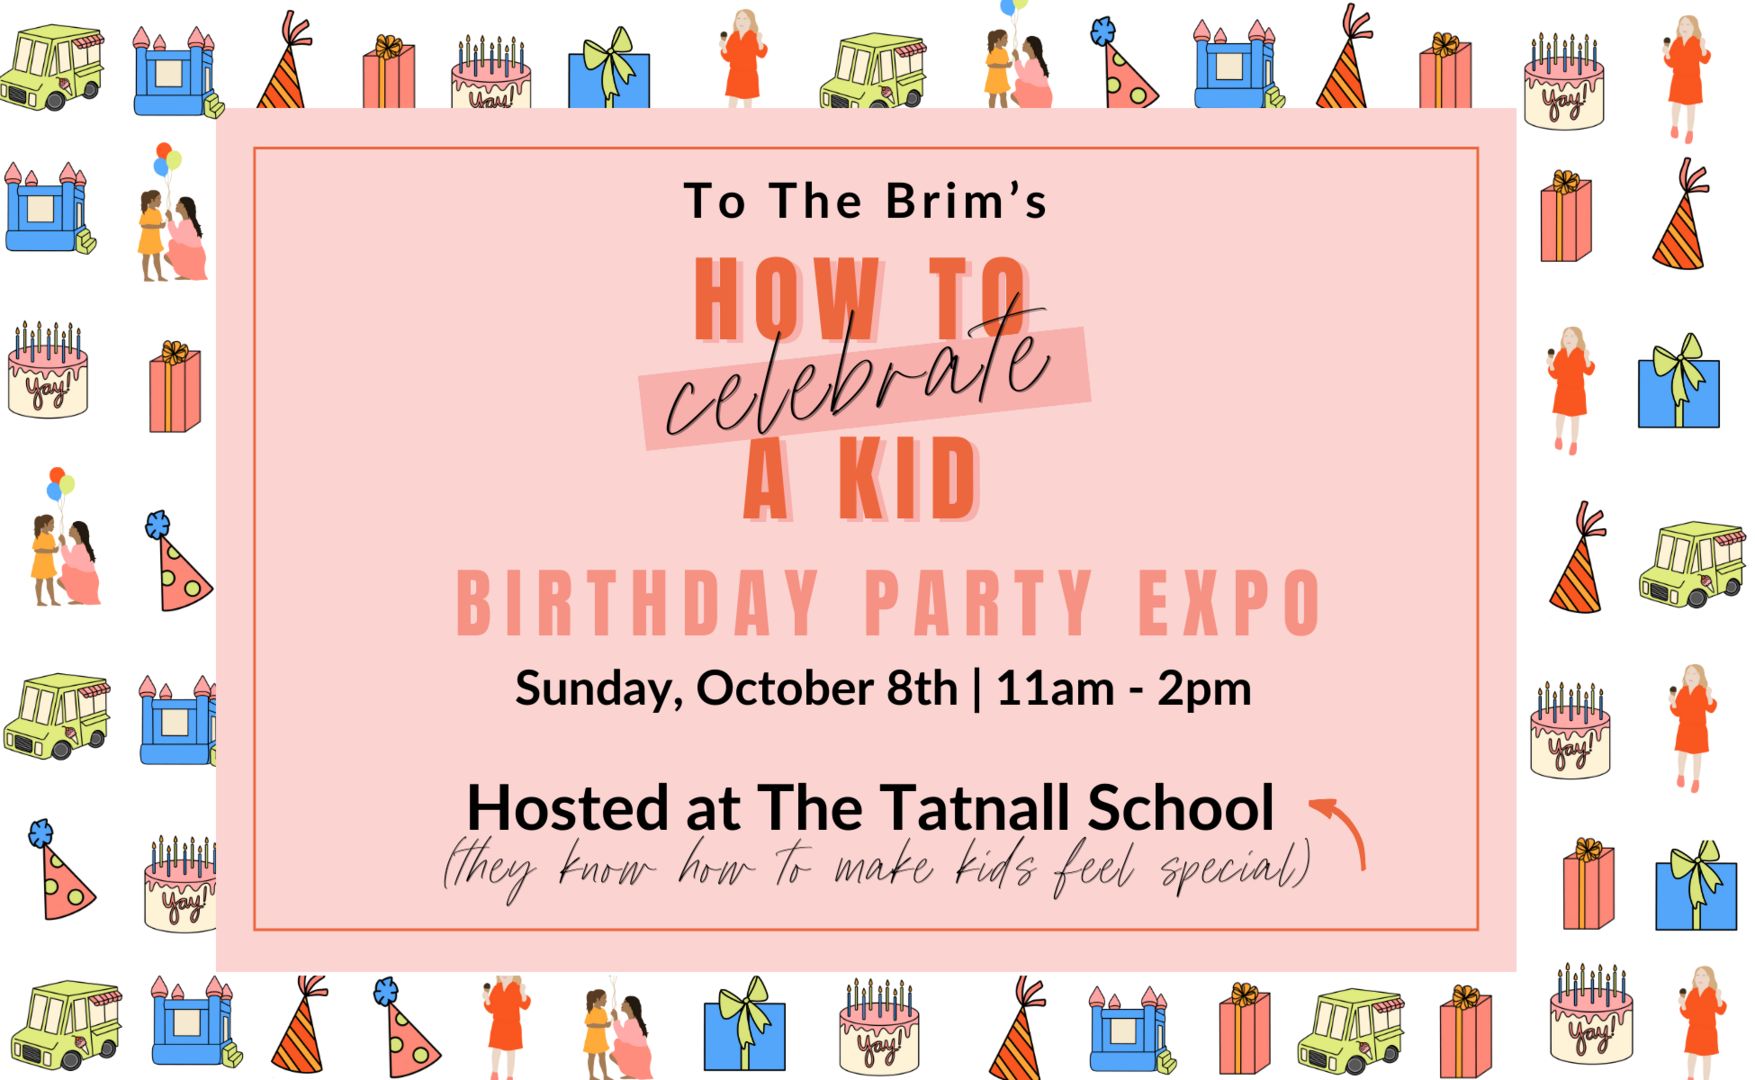 How To Celebrate a Kid: To The Brim's Birthday Party Expo, Wilmington, Delaware, United States